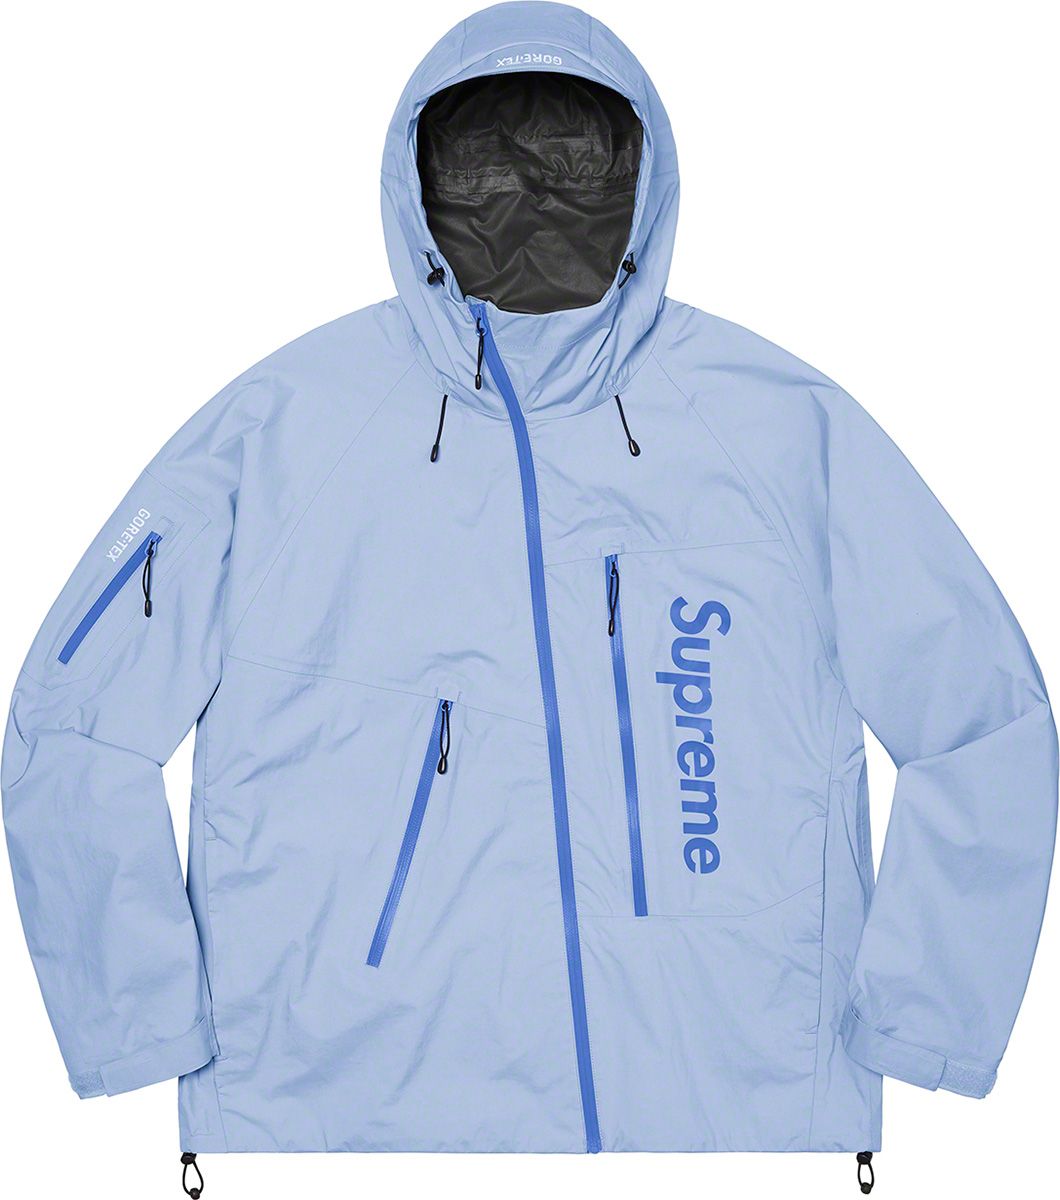 GORE-TEX Paclite Shell Jacket - Spring/Summer 2021 Preview